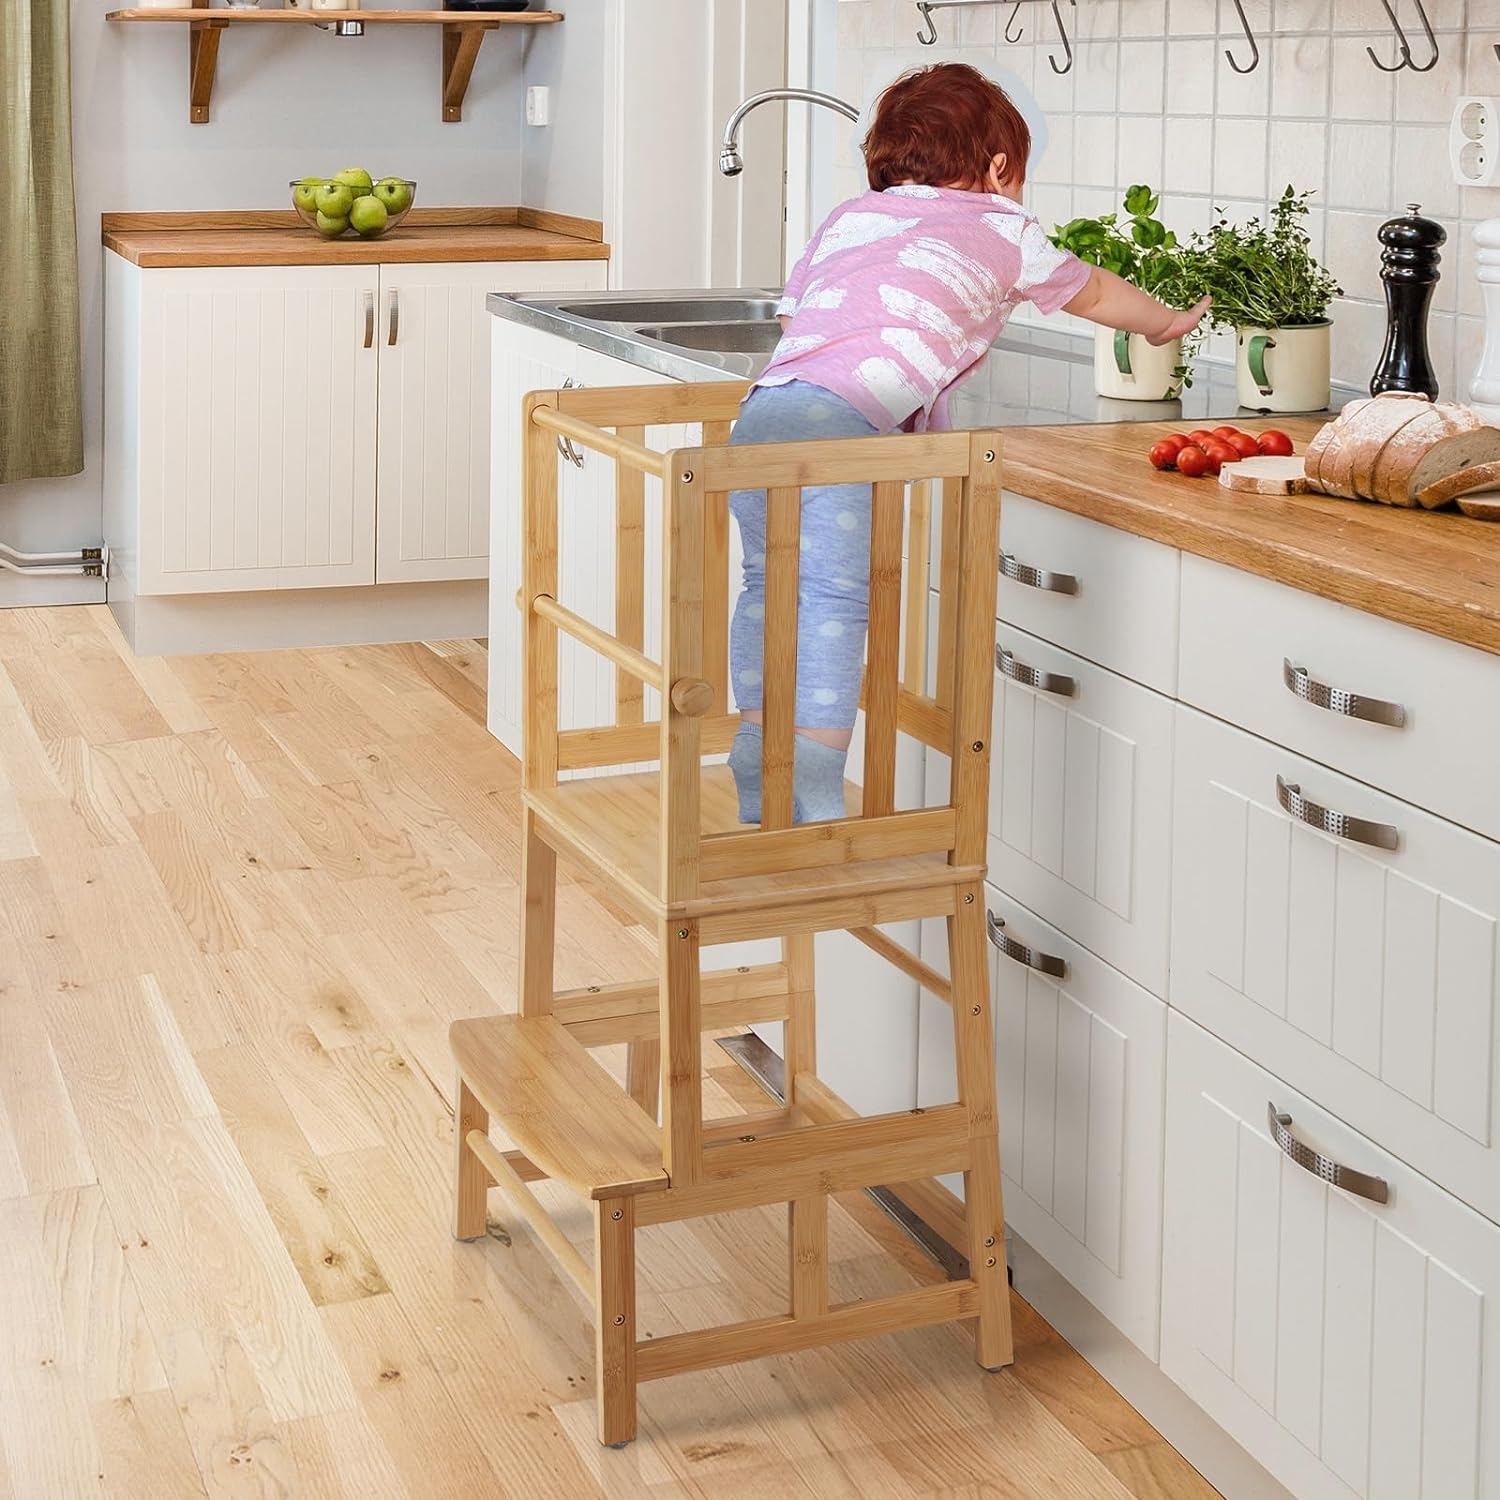 Child stands on a wooden learning tower in a kitchen, reaching the countertop safely